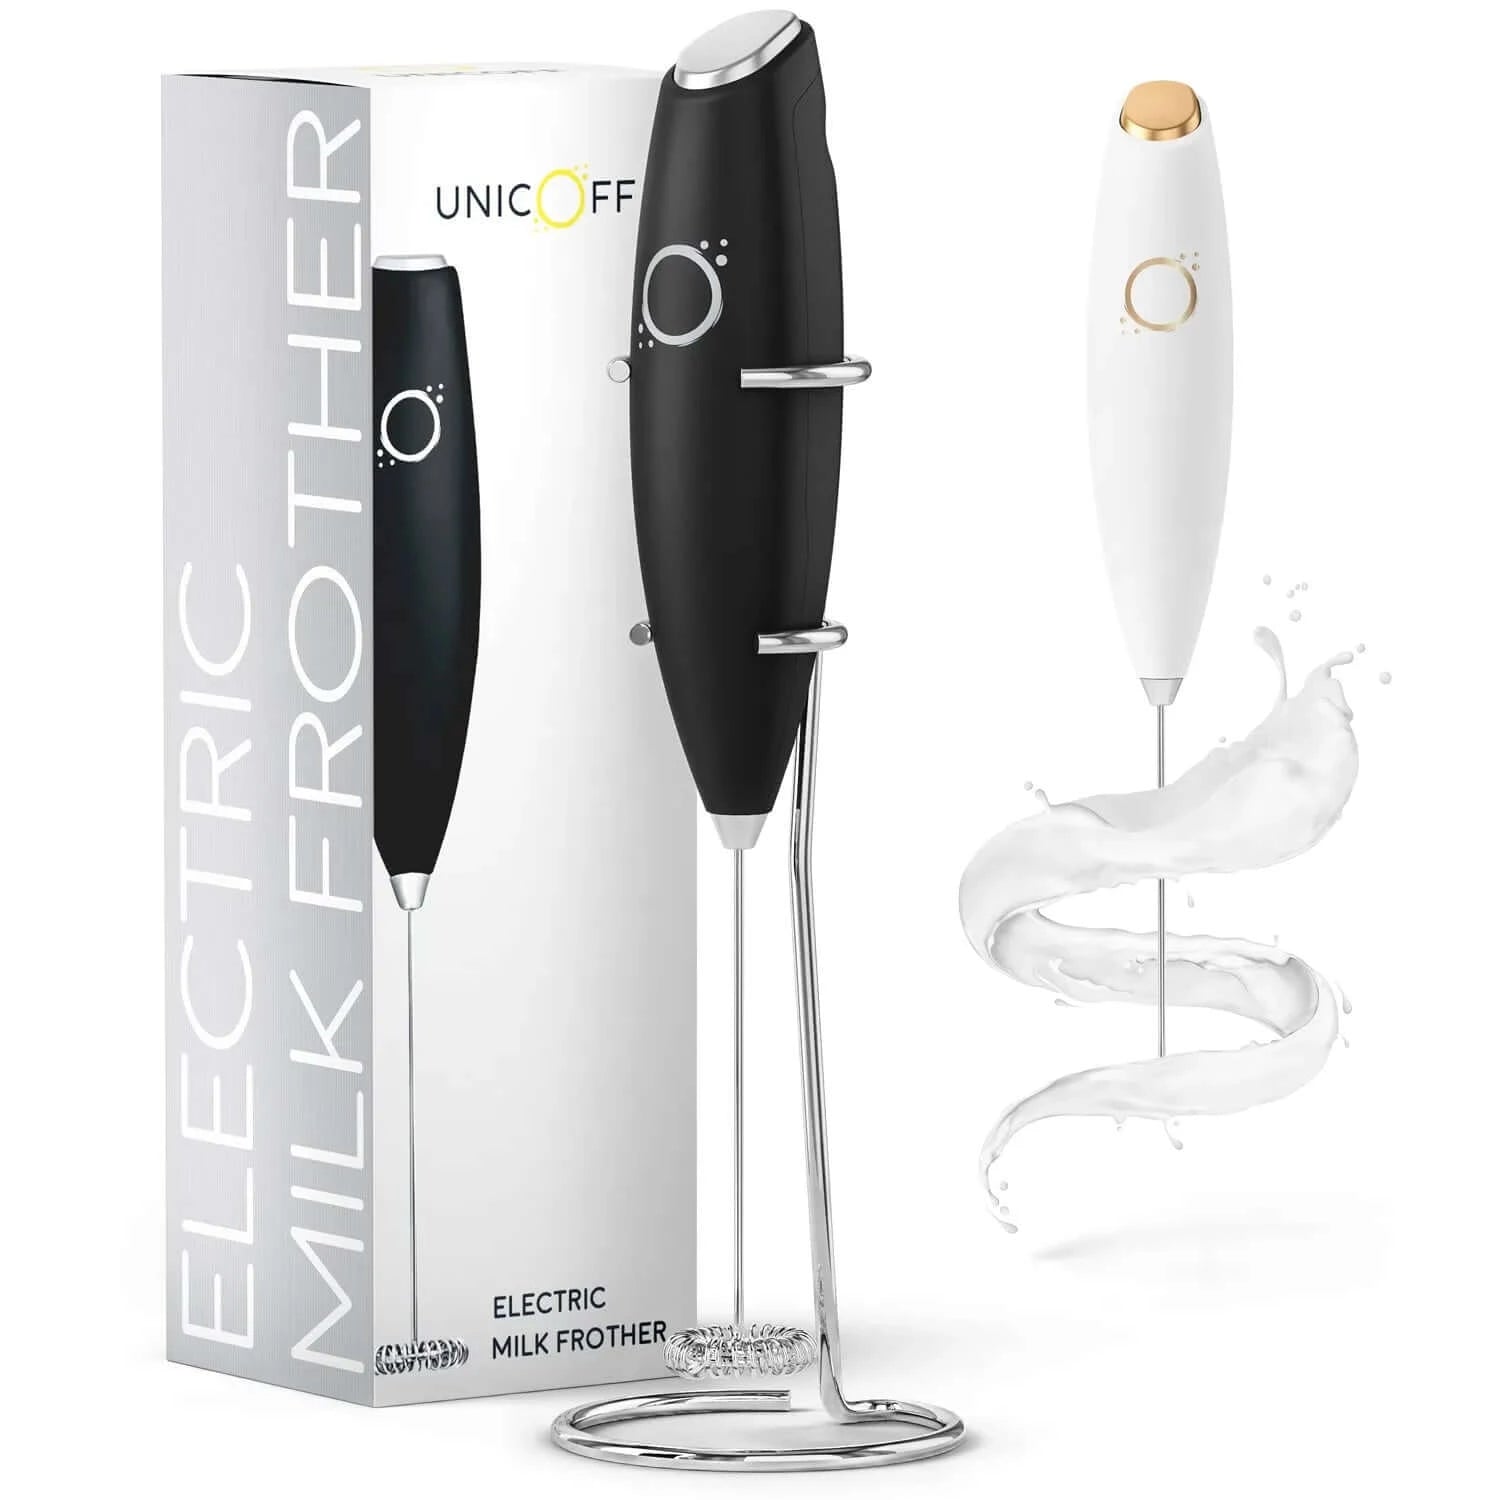 Unicoff Black Milk Frother - Premium Frothing Power for Perfectly frothed Milk, Milk Frother, Milk Frothers & Steamers, Unicoff